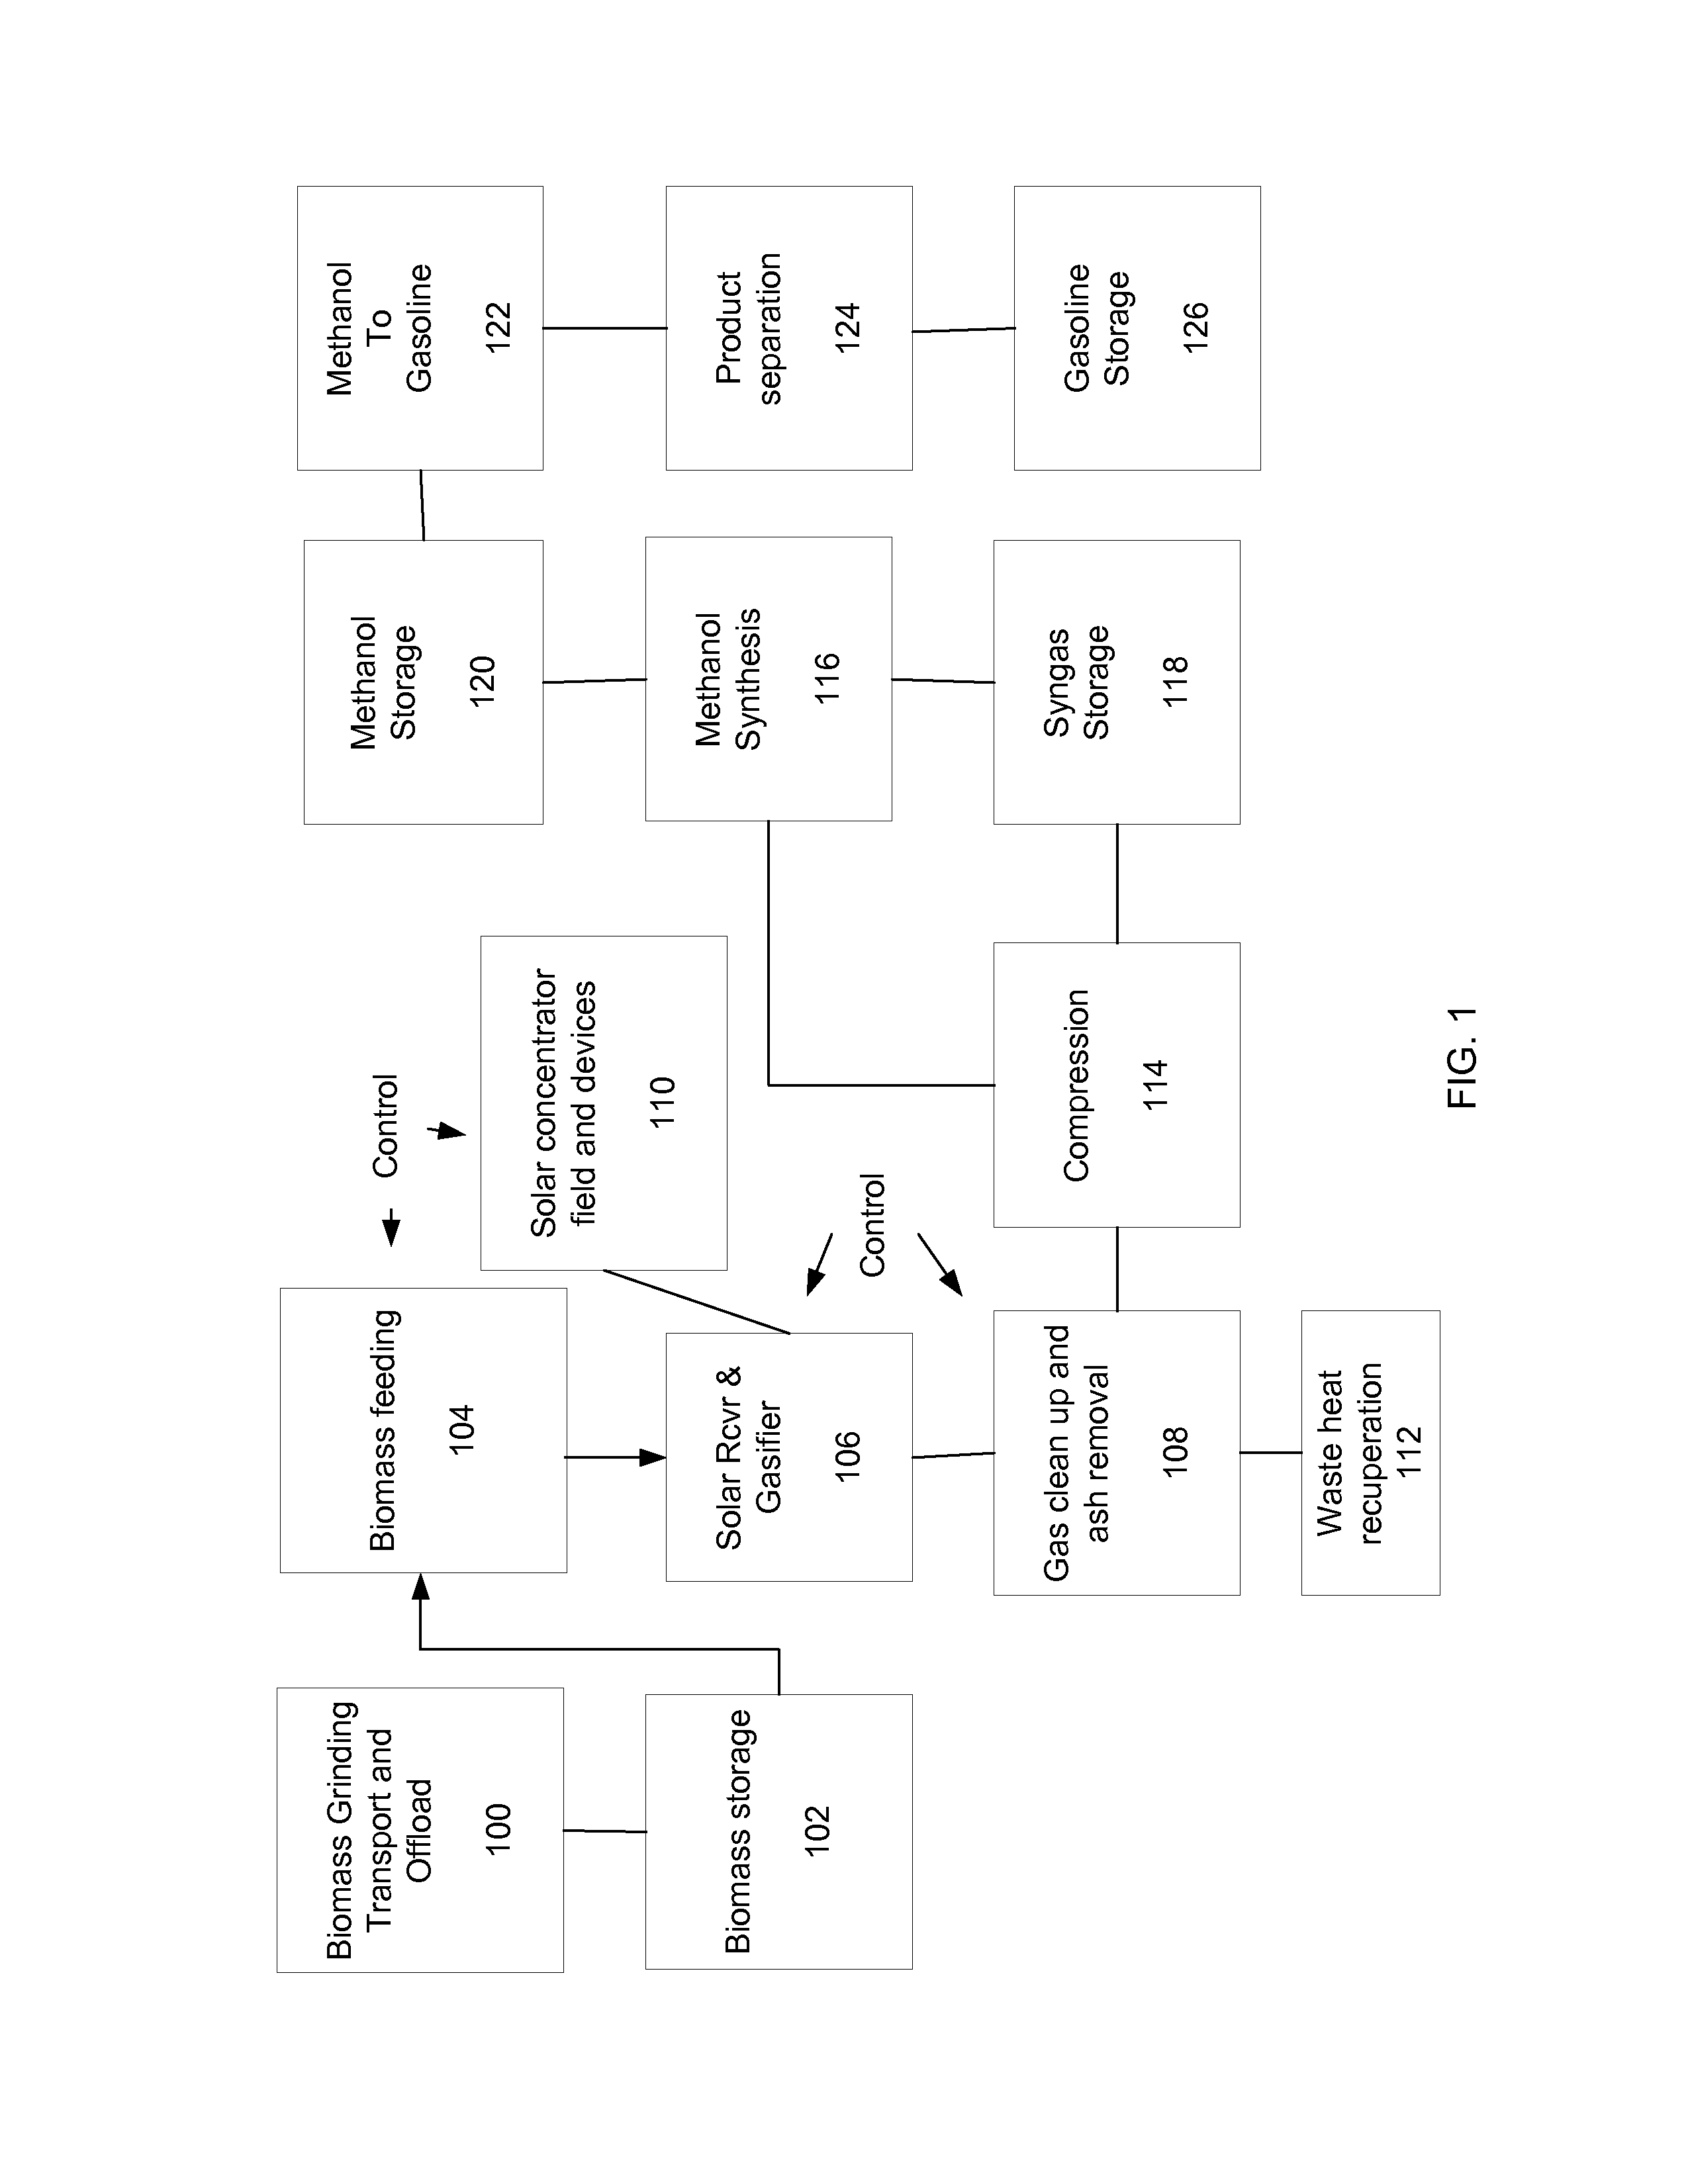 Systems and methods for biomass gasifier reactor and receiver configuration